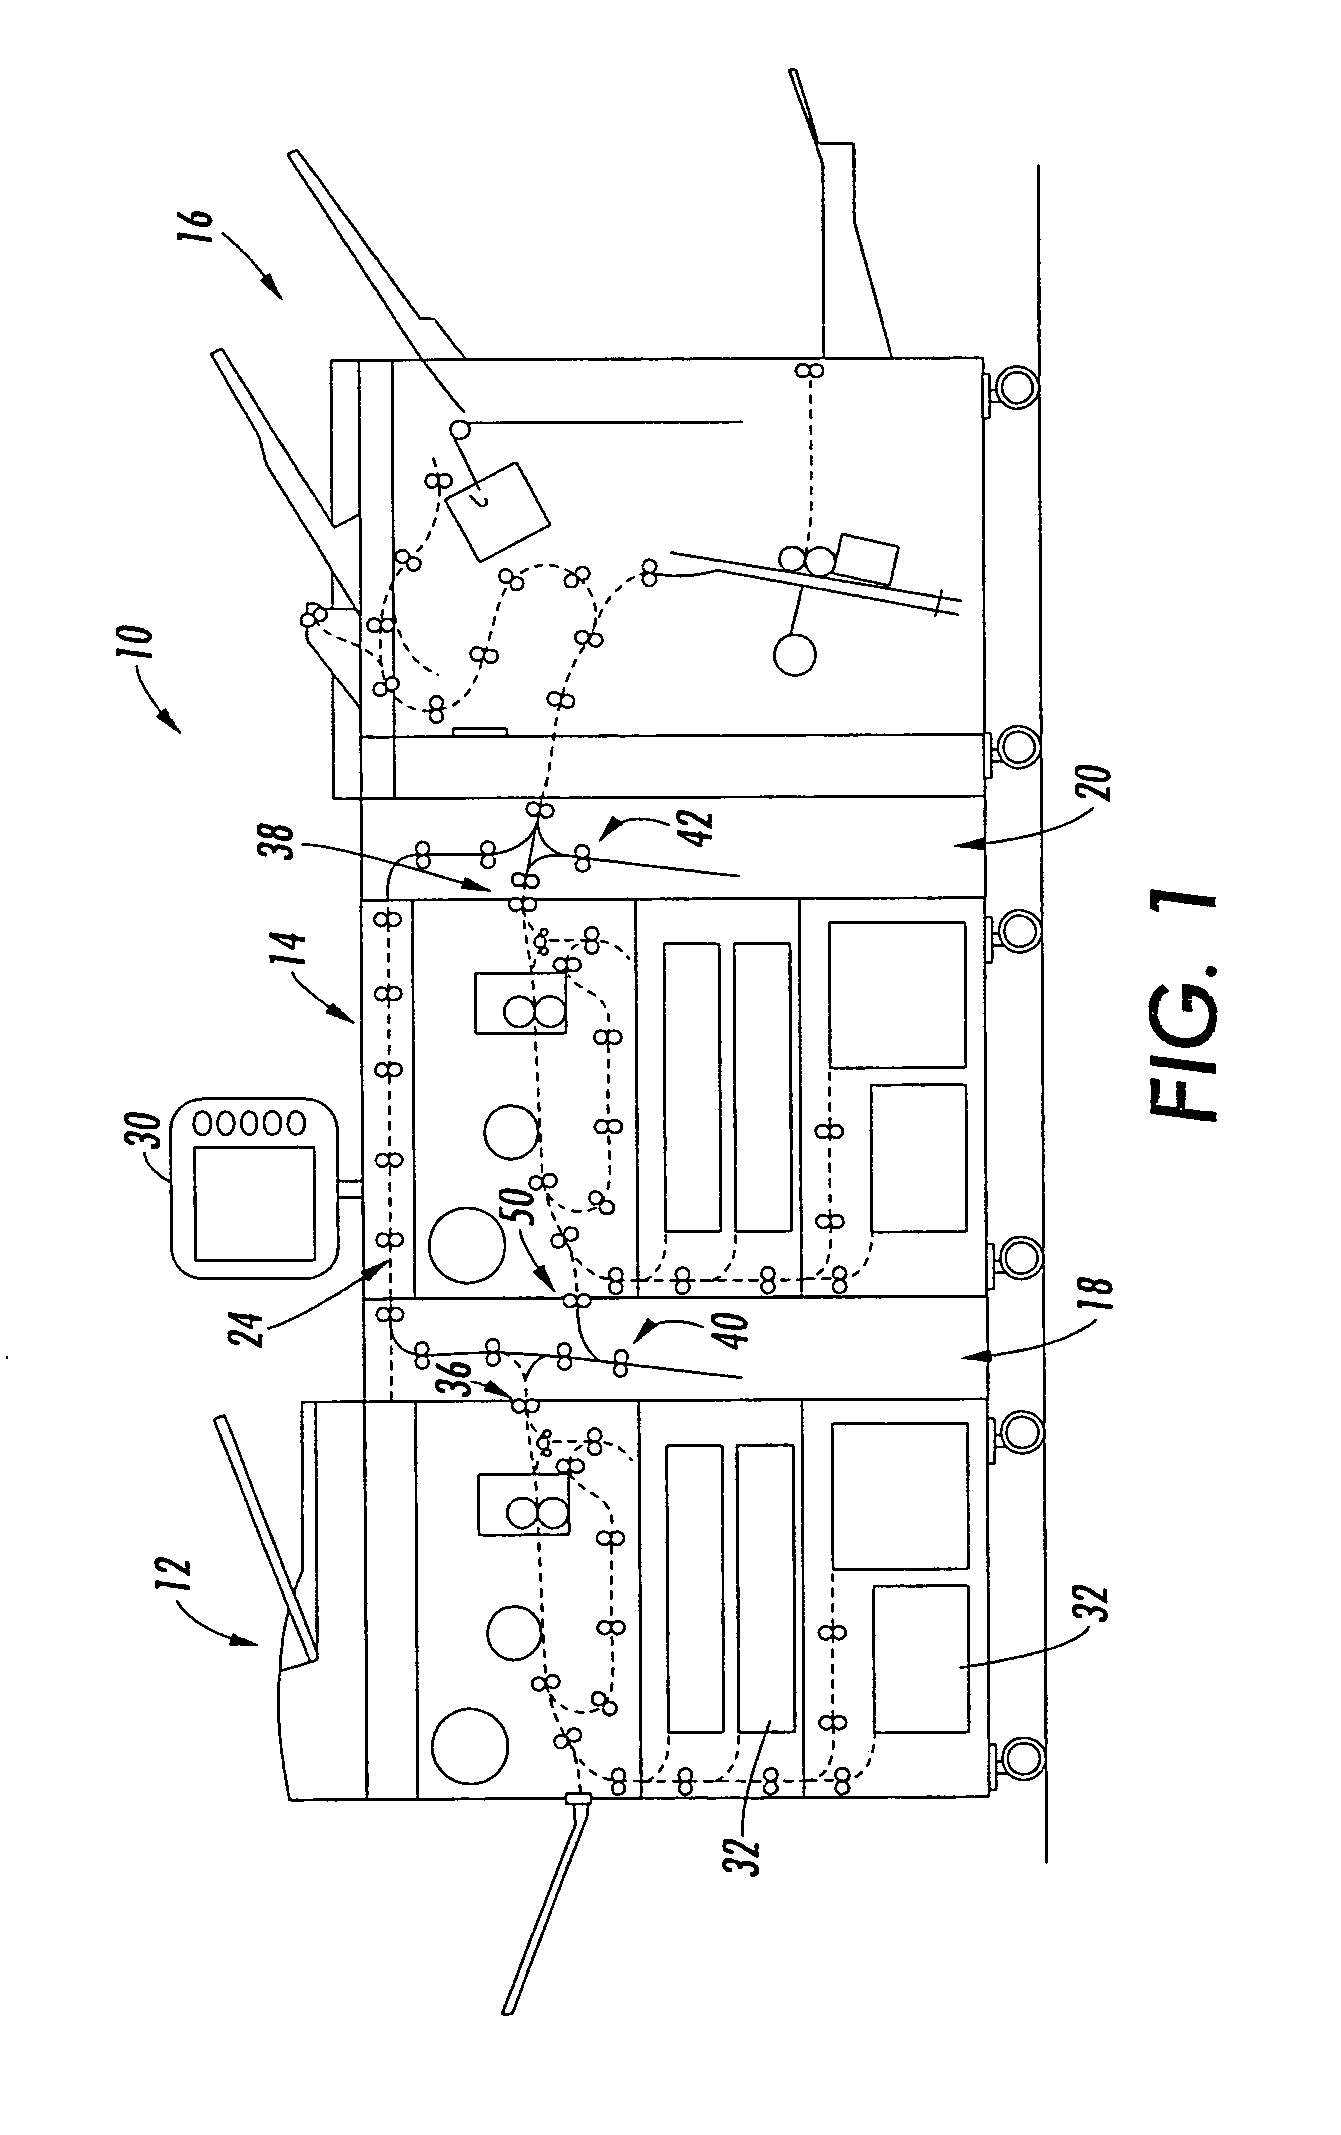 Printing system with horizontal highway and single pass duplex